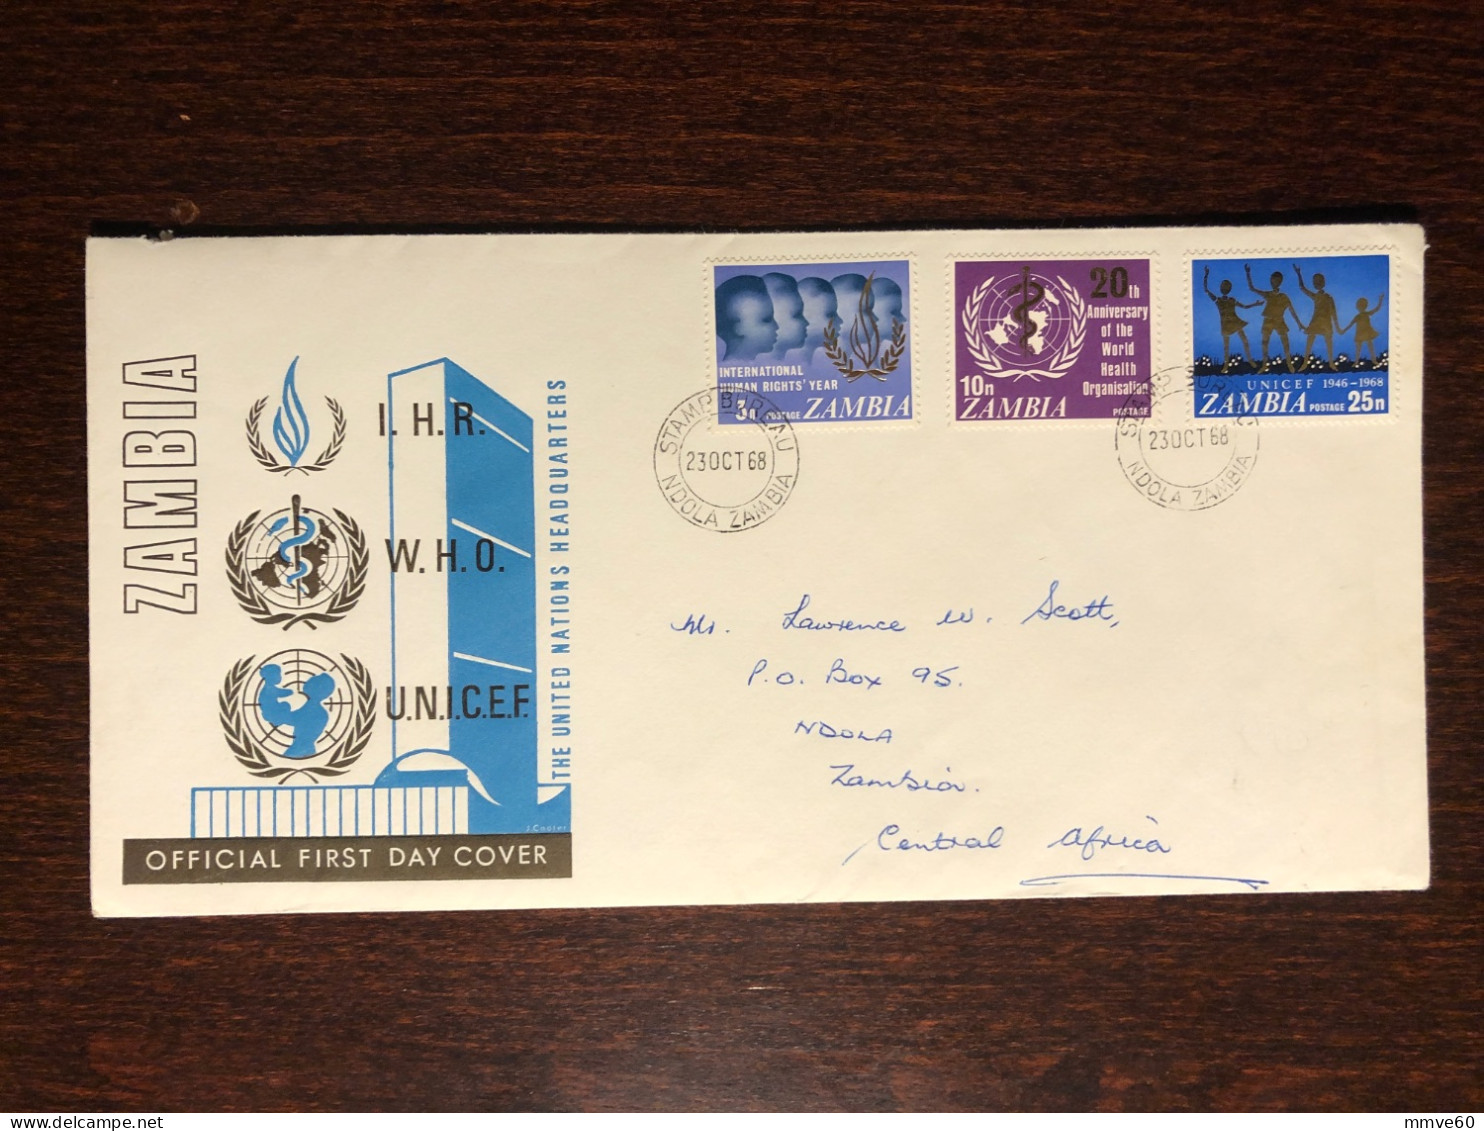 ZAMBIA FDC COVER 1968 YEAR WHO OMS UNICEF HEALTH MEDICINE STAMPS - Zambia (1965-...)